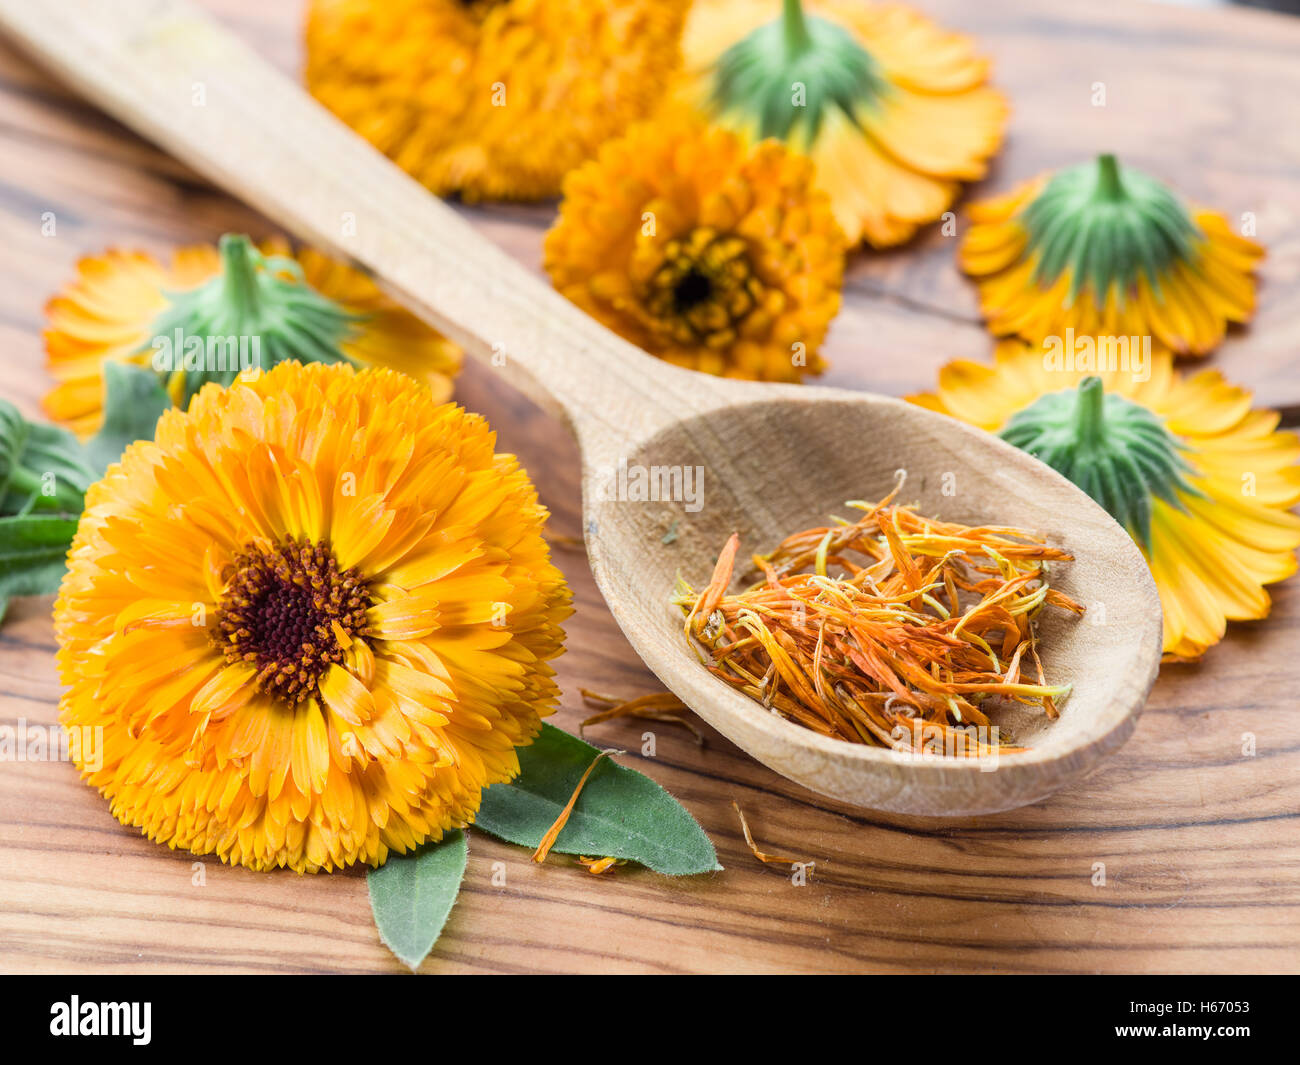 Calendula flowers on the old wooden table. Stock Photo